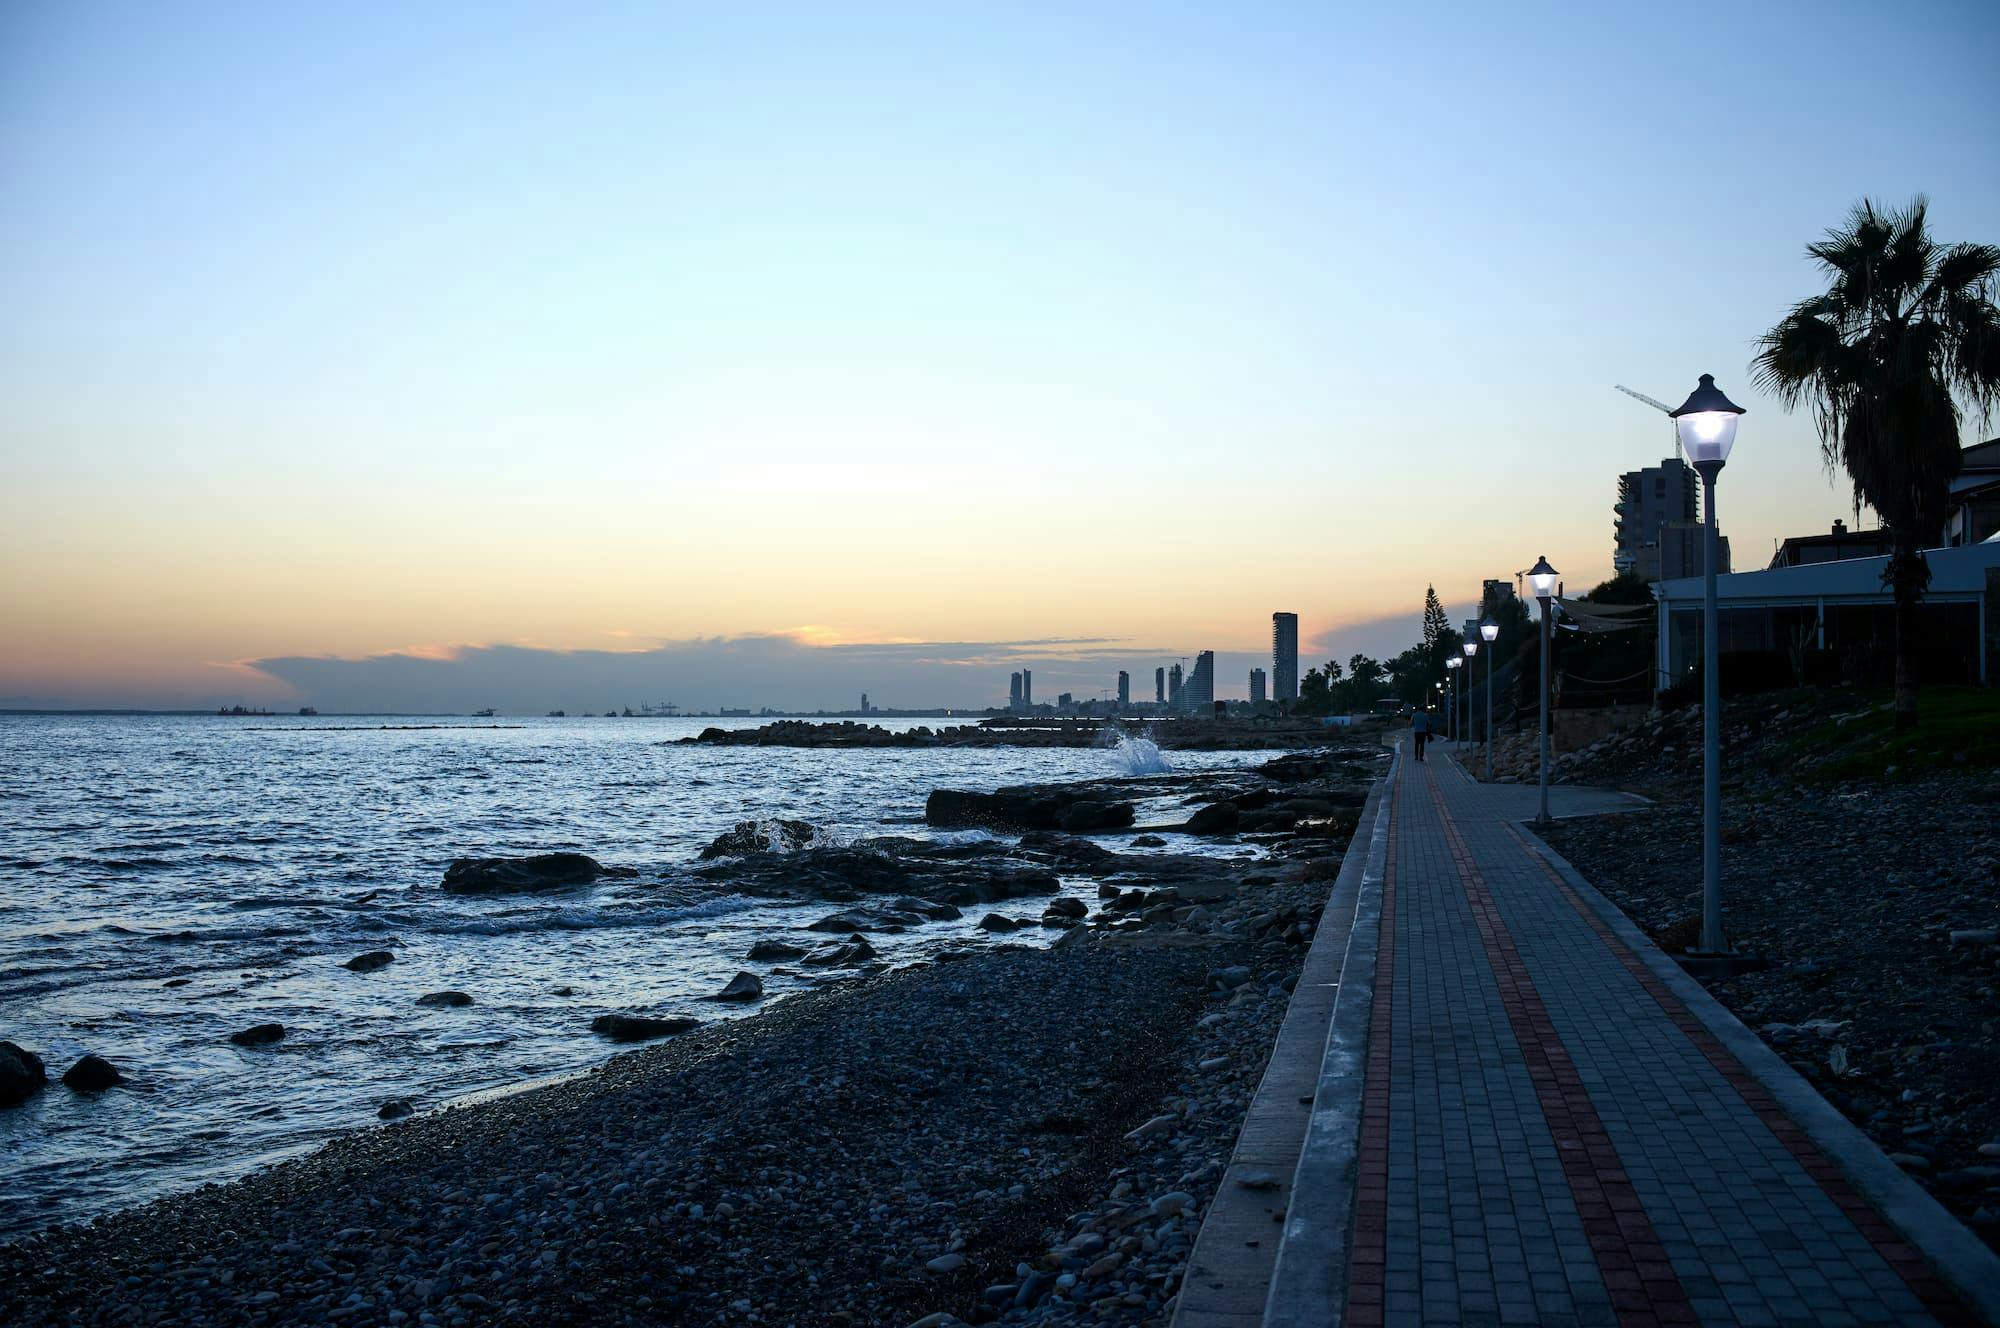 Twilight descends on the Limassol coastline in Cyprus, paralleling the calm assurance of local VPS hosting services